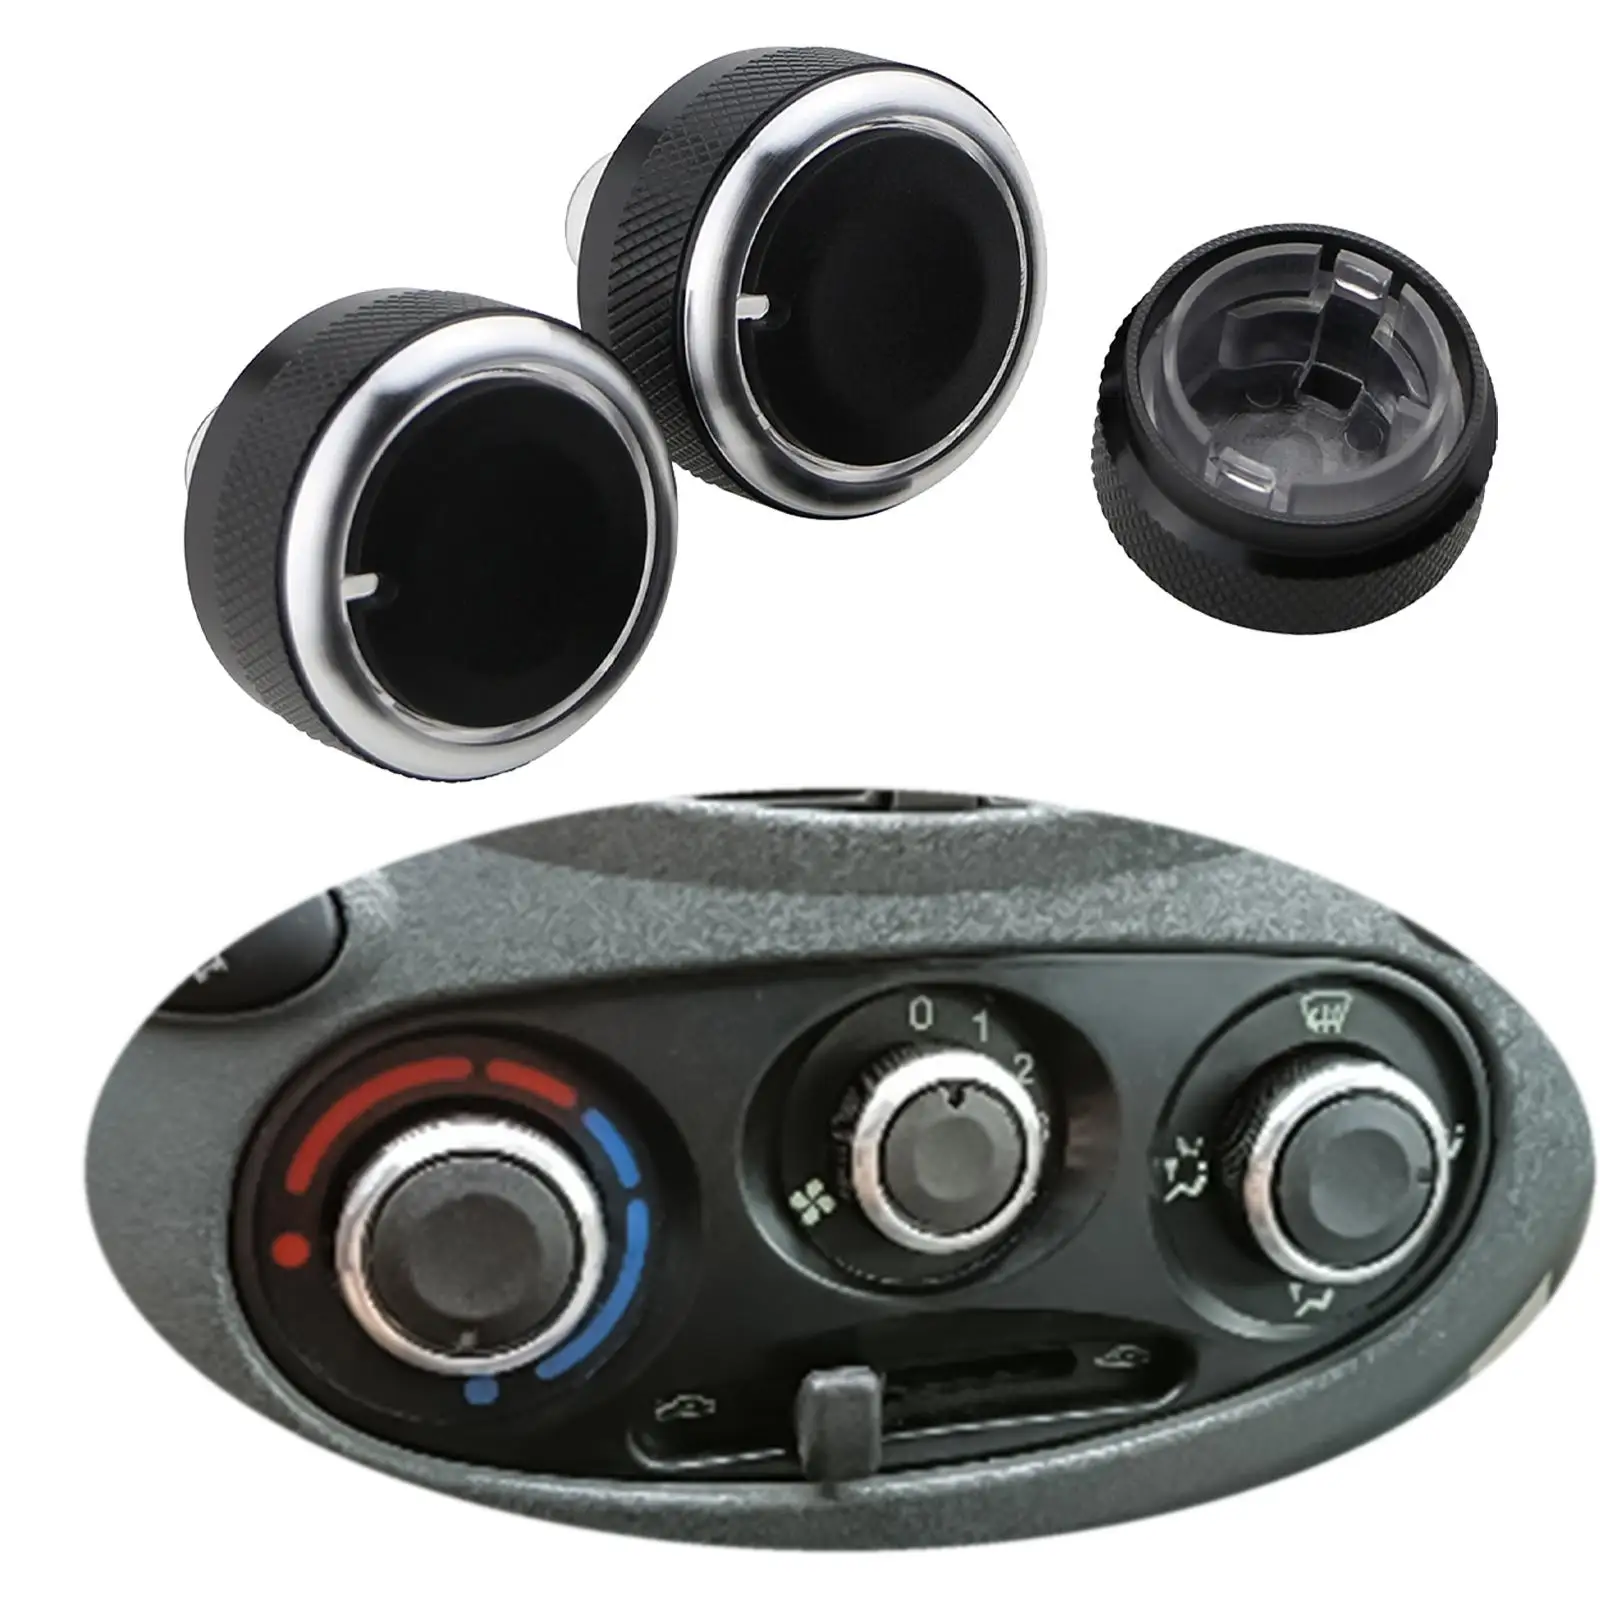 Car Air Conditioner Button Switch, 3 Piece Car Air Conditioner Button Switch, Car Interior Accessories